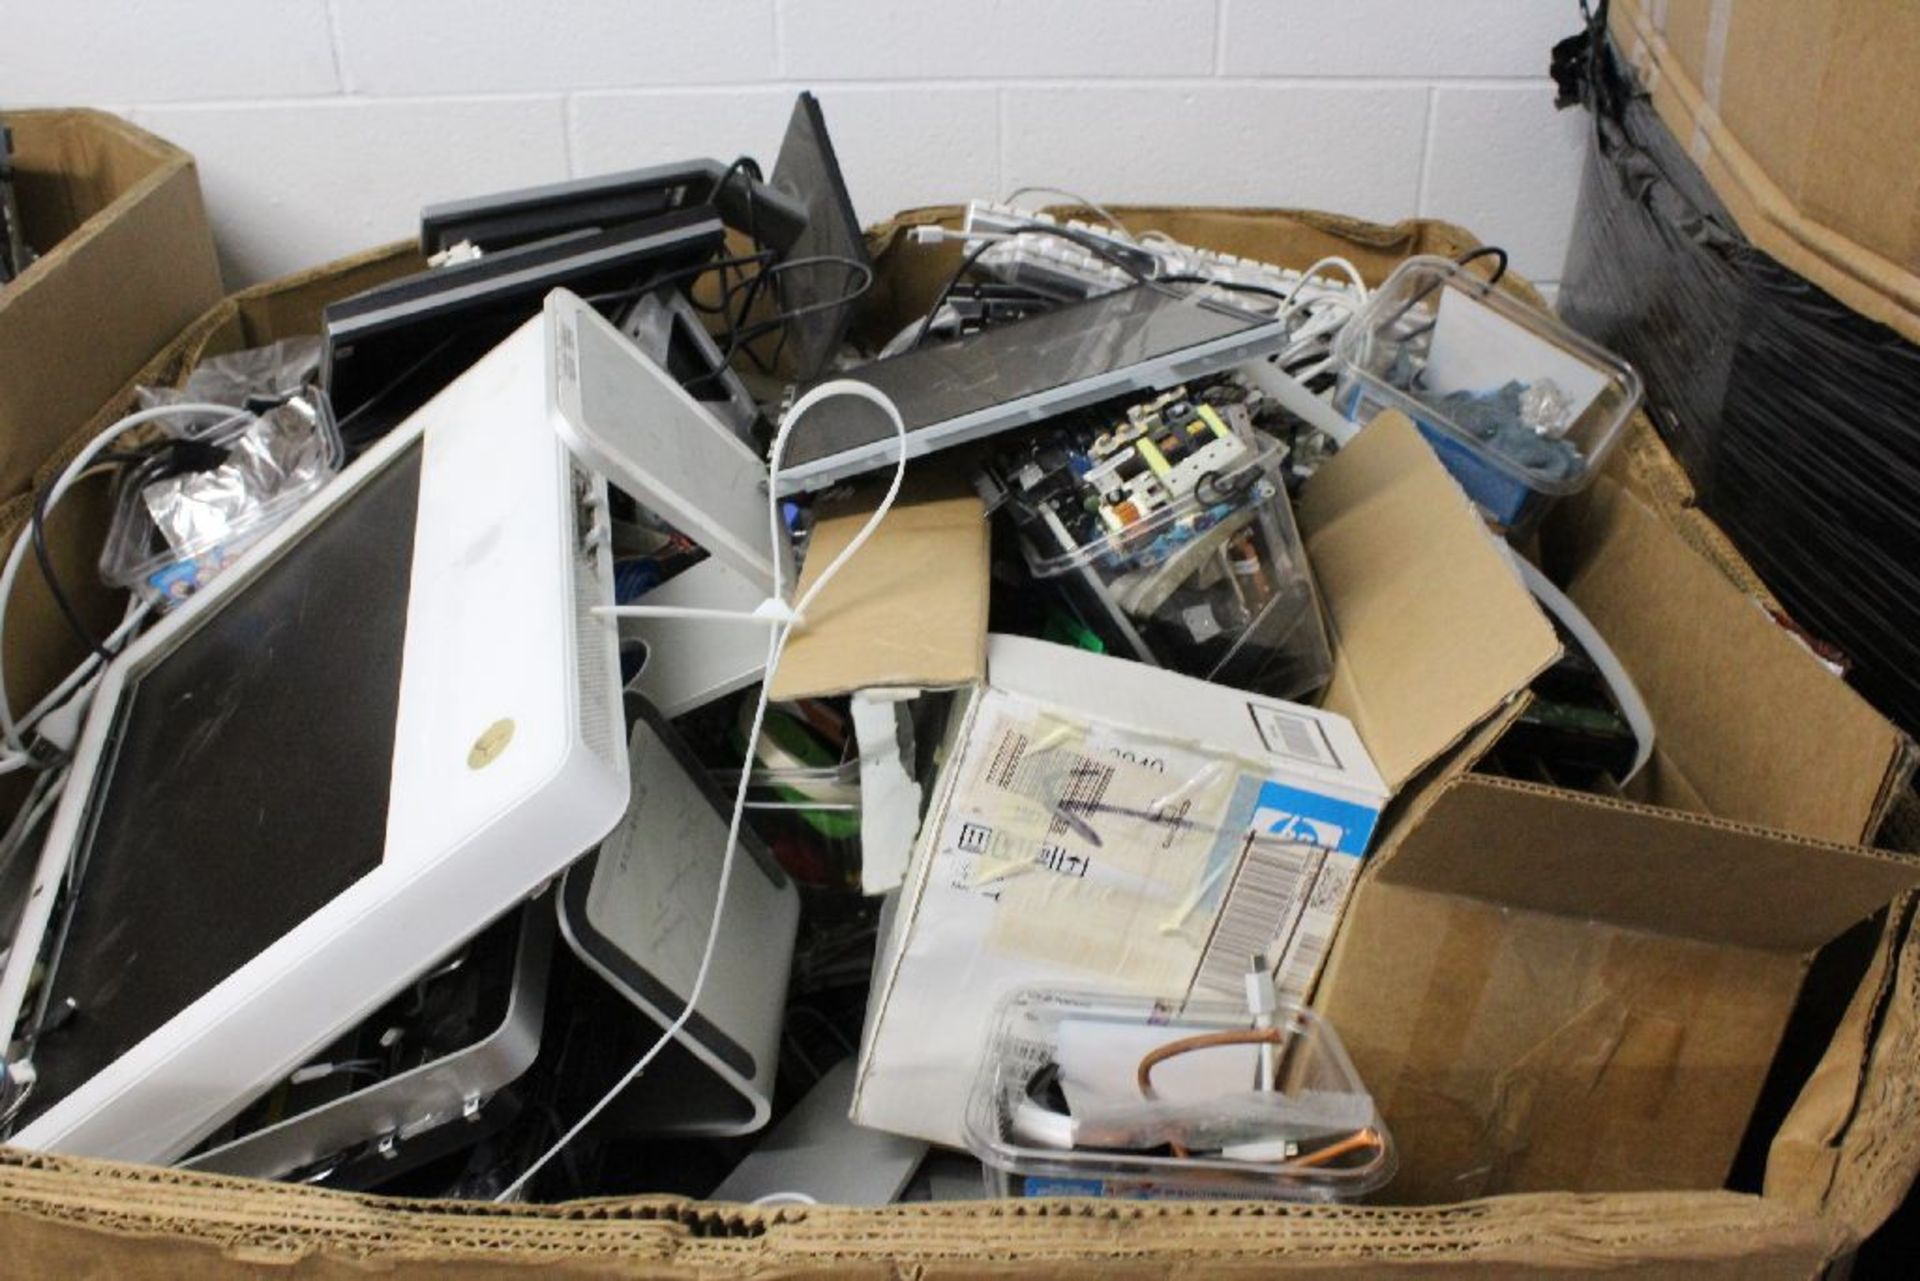 ASSORTED ELECTRONIC SCRAP INCLUDING MONITORS, WRITING, AND COMPUTER COMPONENTS - Image 2 of 2